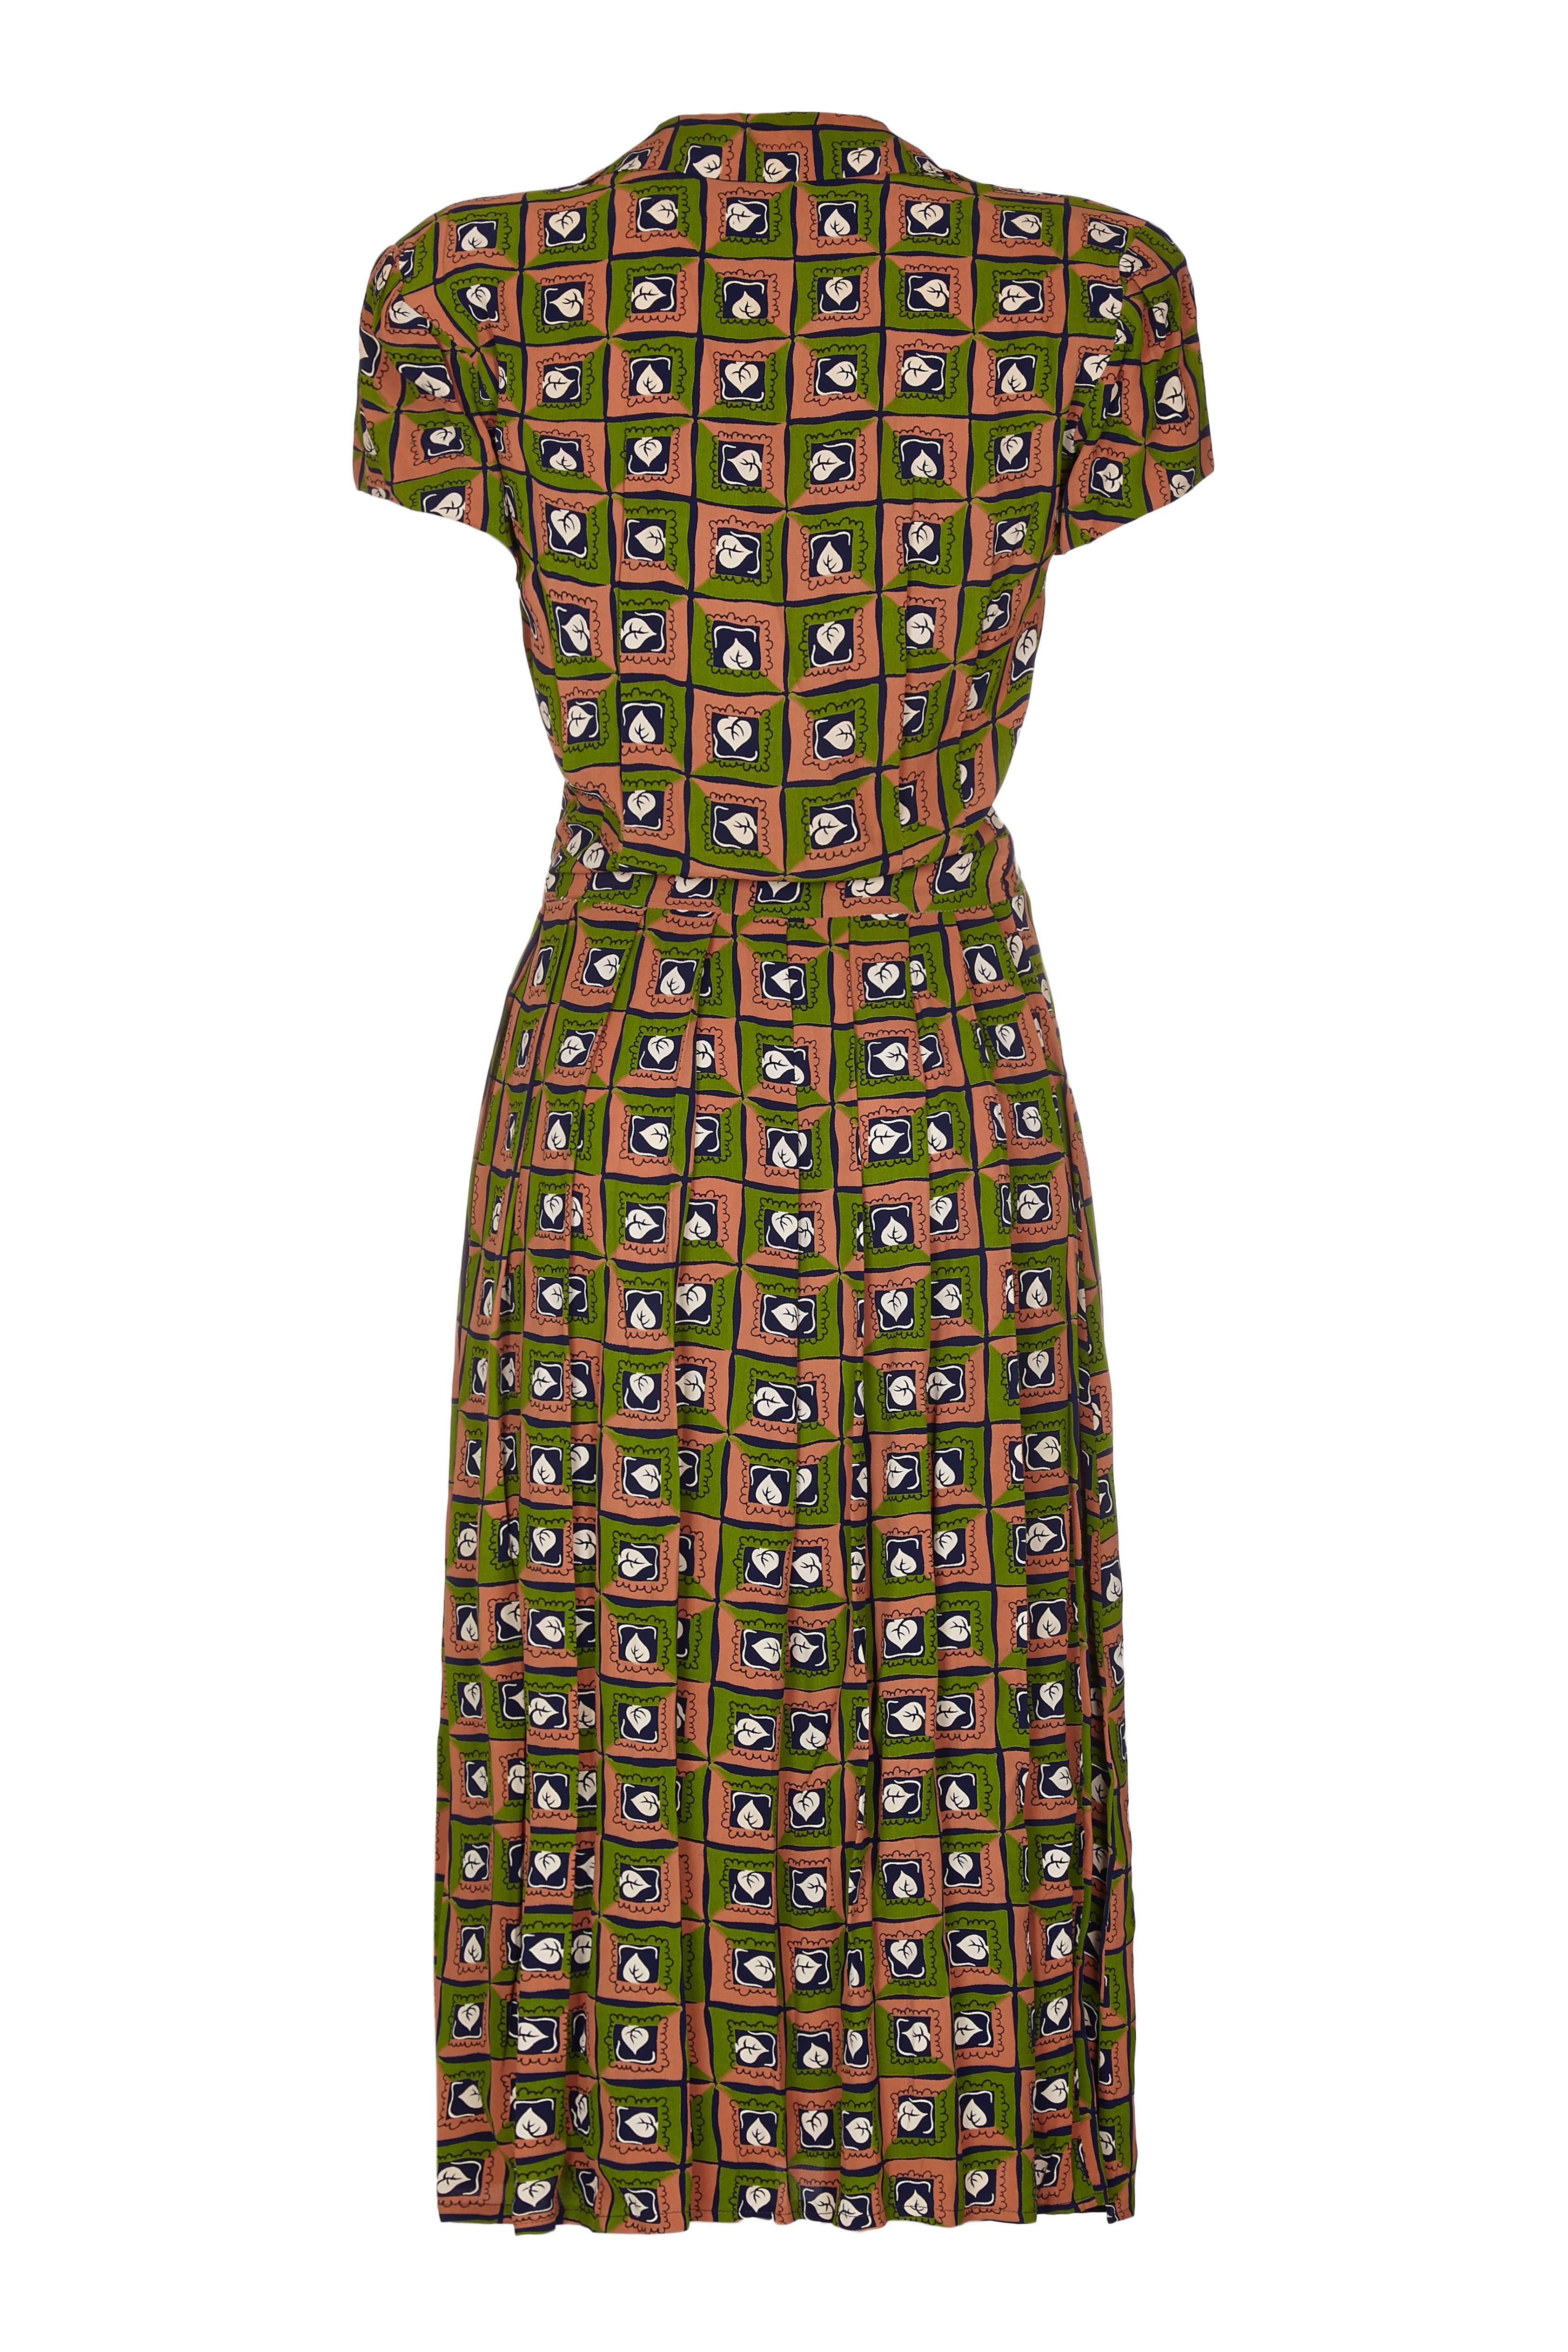 Fabulous Suzy Perette labelled dress with novelty leaf print in navy, green and ochre.  The company was founded during the 1940s and headquartered in New York.  The owner had a licence to copy elements of Christian Dior's designs but they were much